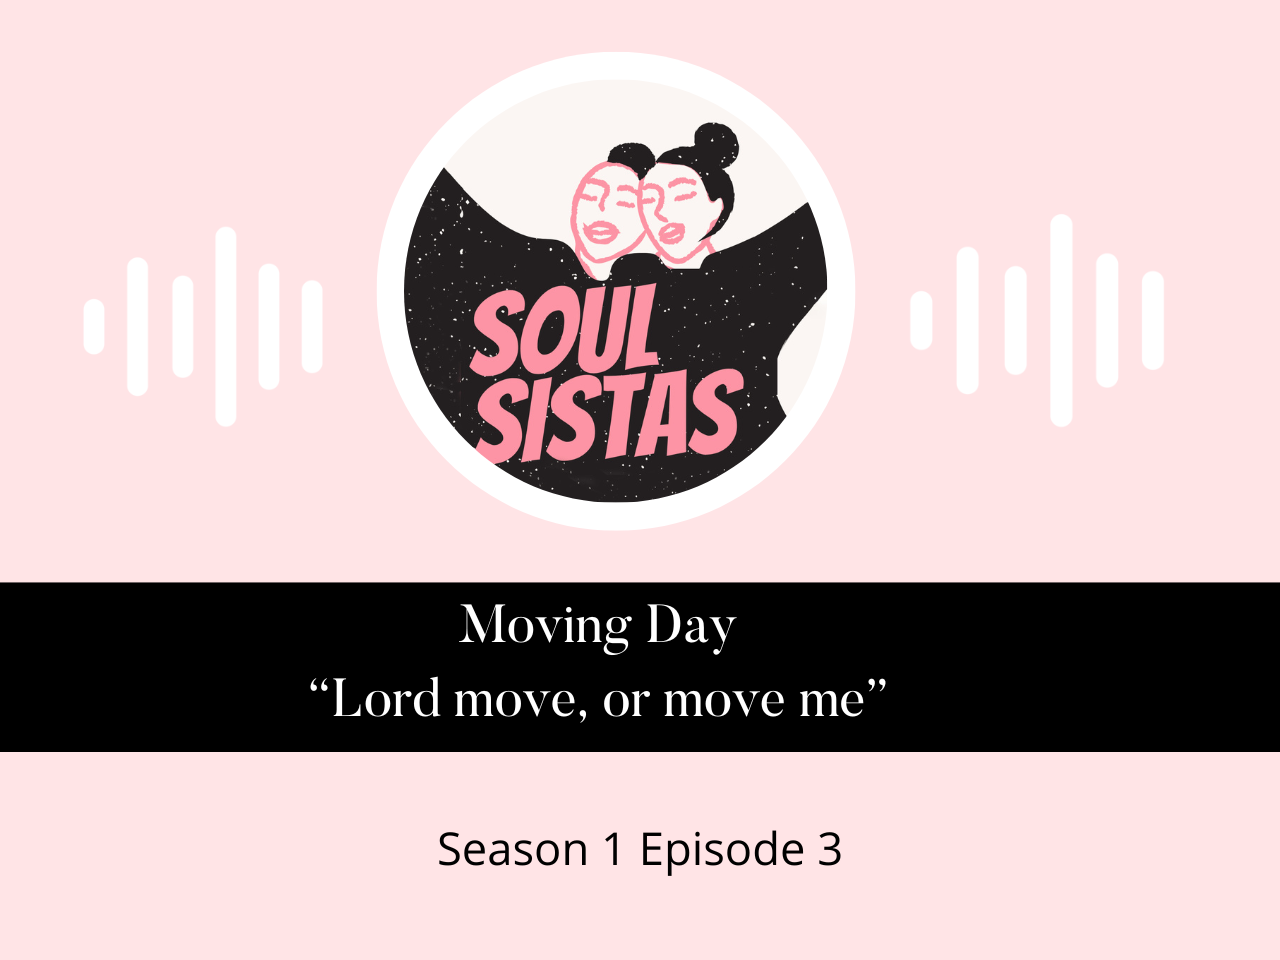 Moving Day: “Lord move, or move me”